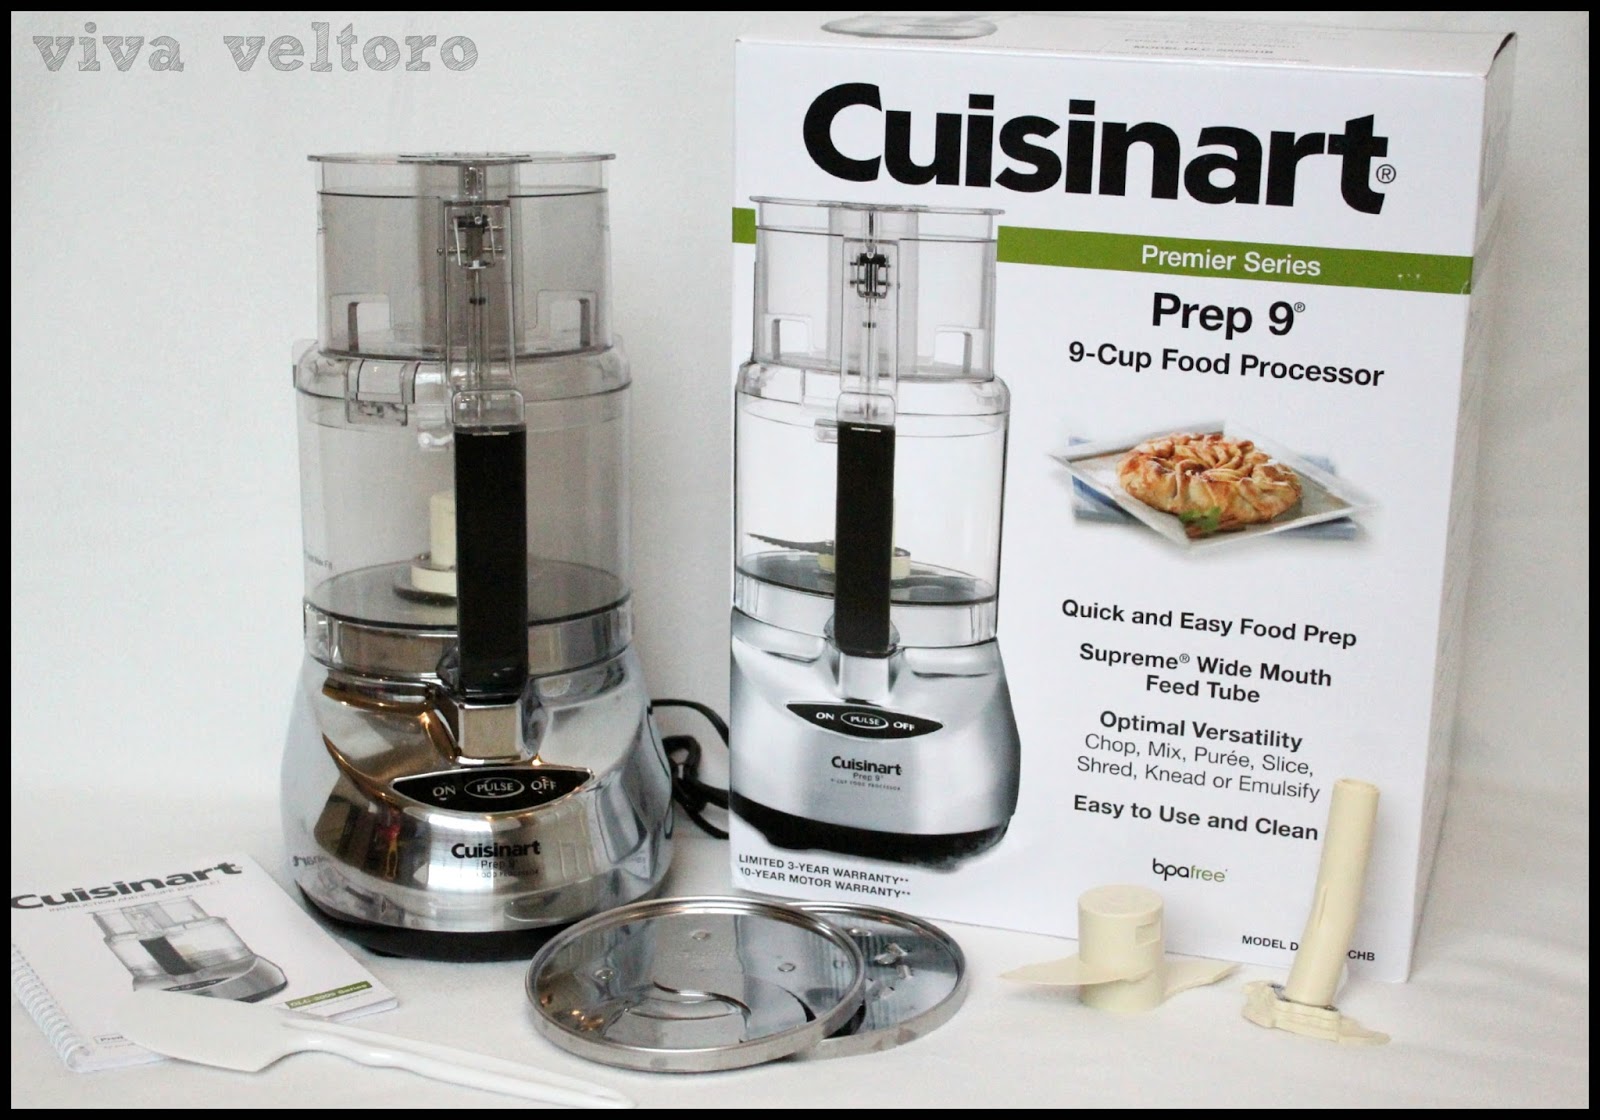 Instruction and recipe booklet - Cuisinart